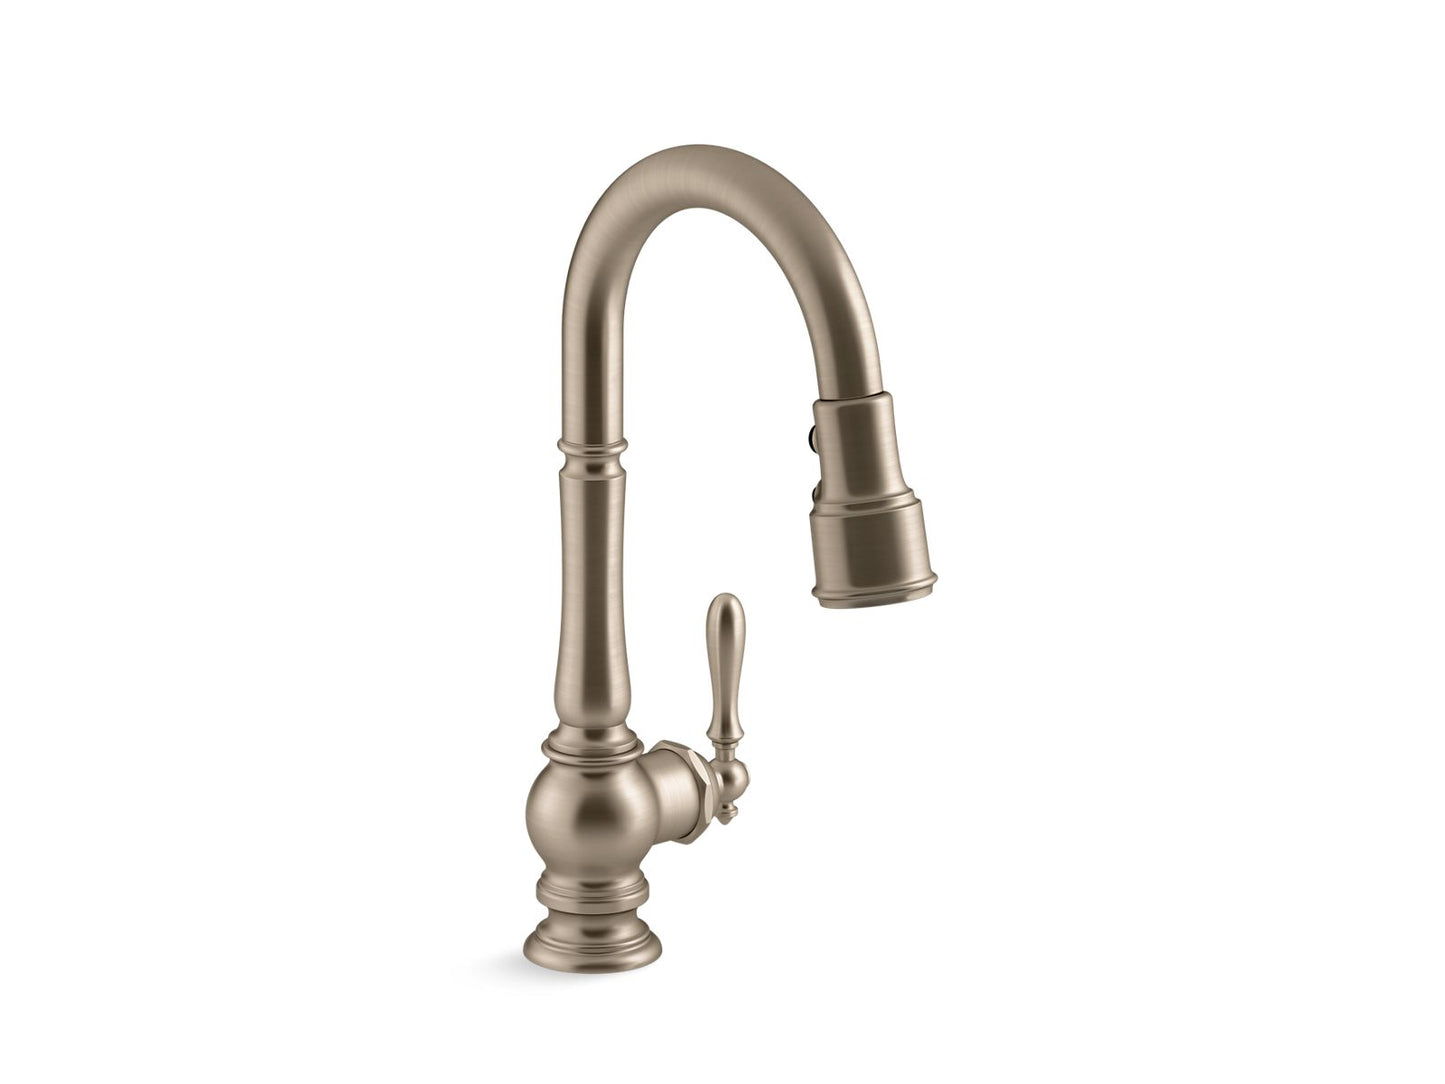 KOHLER K-99261-BV Artifacts Pull-Down Kitchen Sink Faucet With Three-Function Sprayhead In Vibrant Brushed Bronze